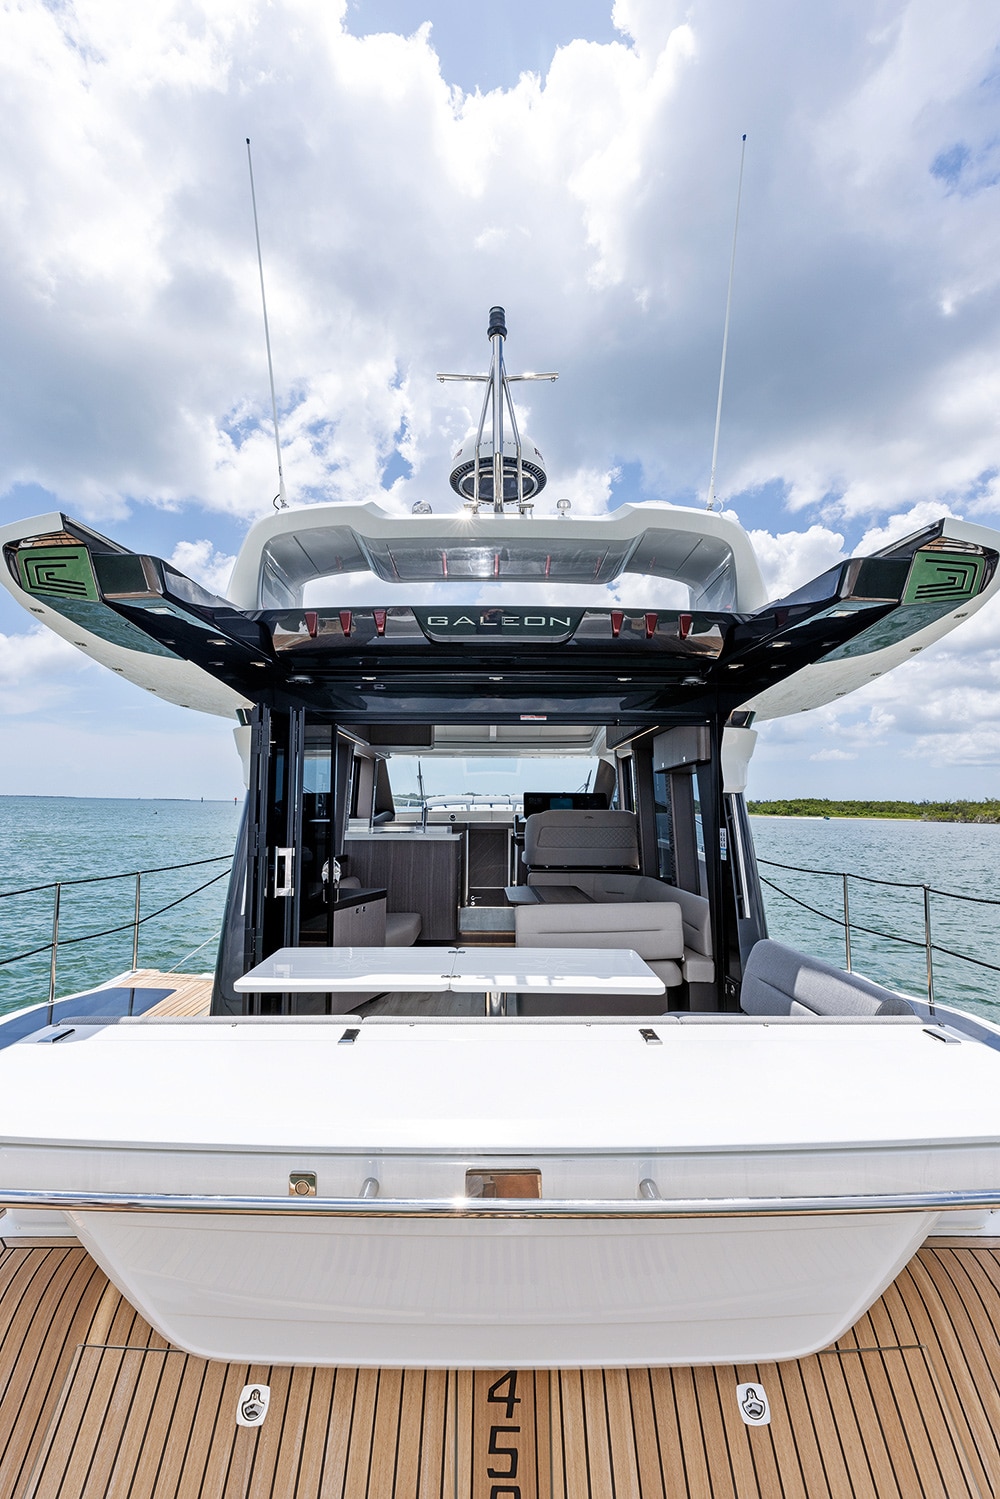 Galeon 450 HTC - The aft sunroof retracts when needed.